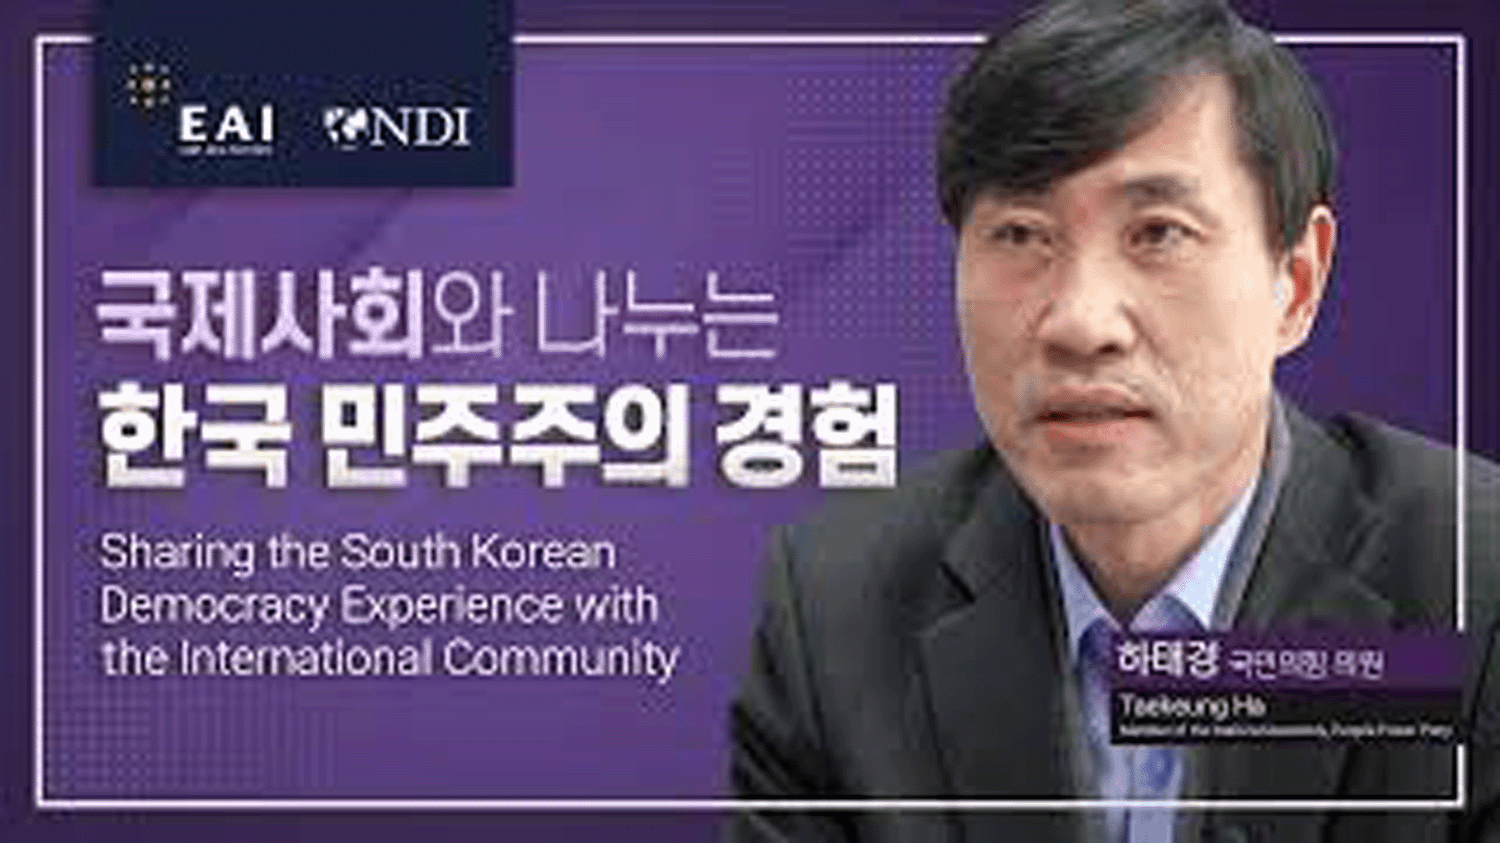 [Democracy Cooperation] Sharing the South Korean Democracy Experience with the International Community Interview II. Taekeung Ha